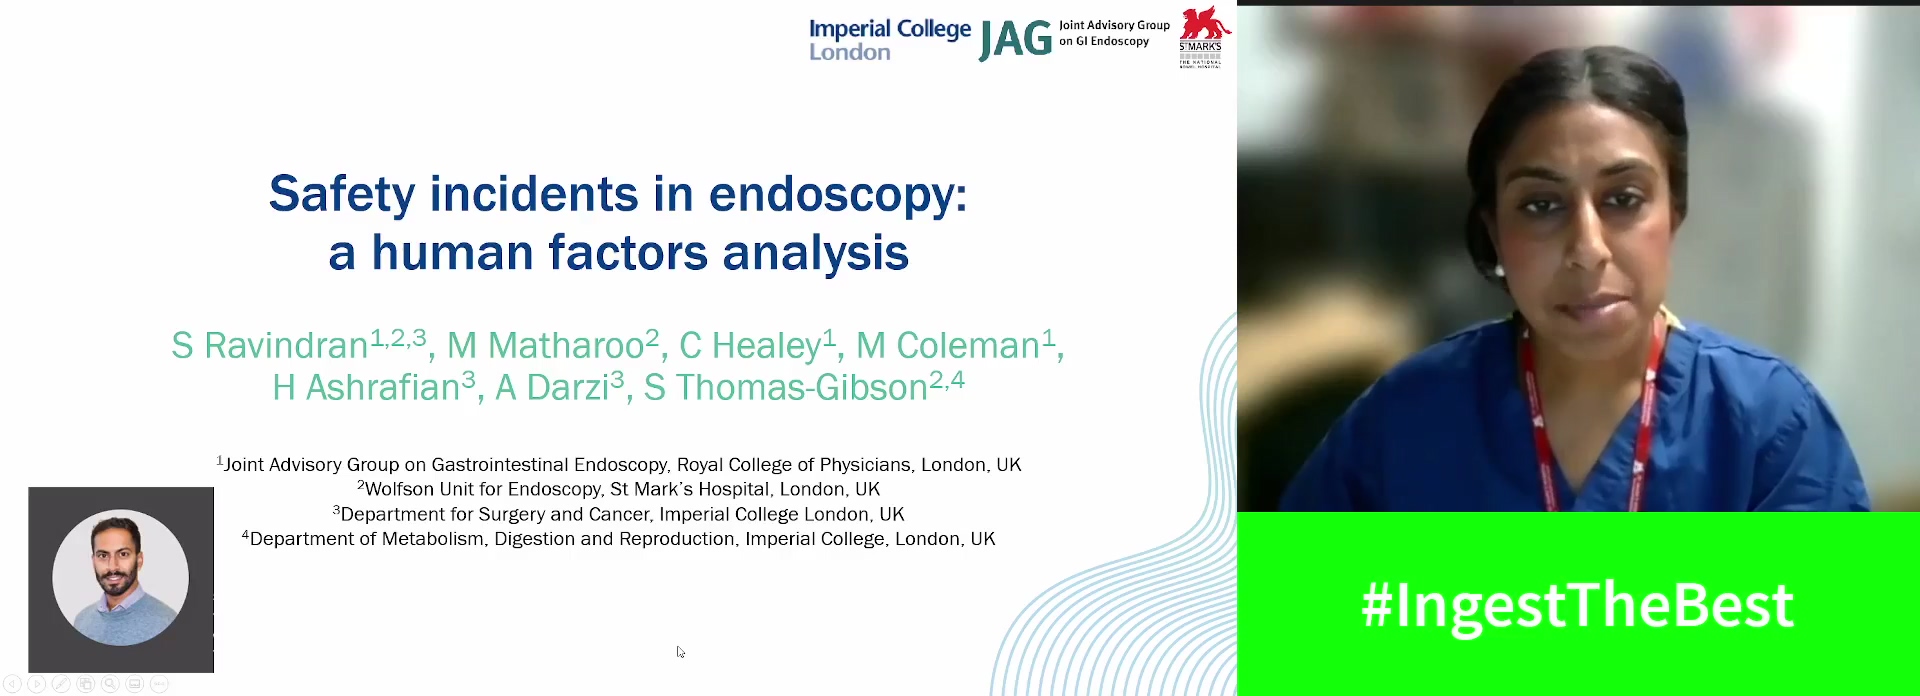 SAFETY INCIDENTS IN ENDOSCOPY: A HUMAN FACTORS ANALYSIS